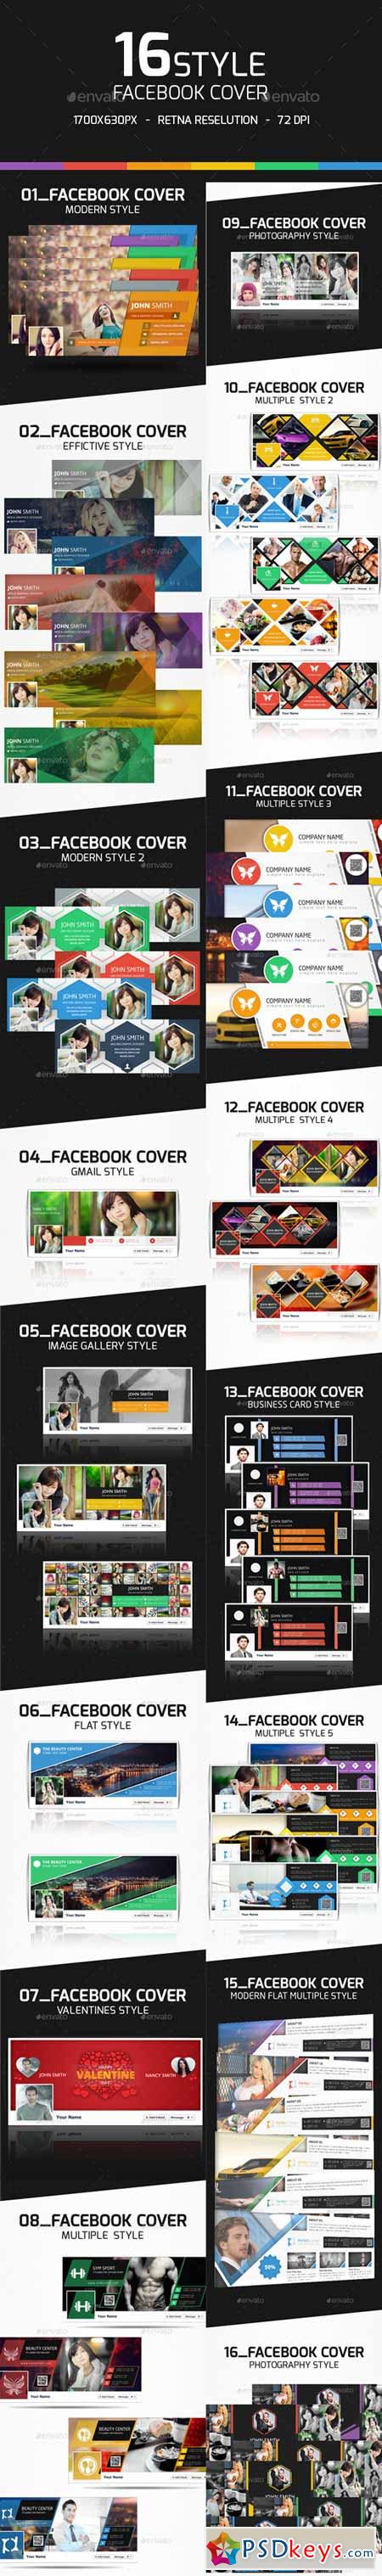 16 Style Facebook Cover Templates 10336526